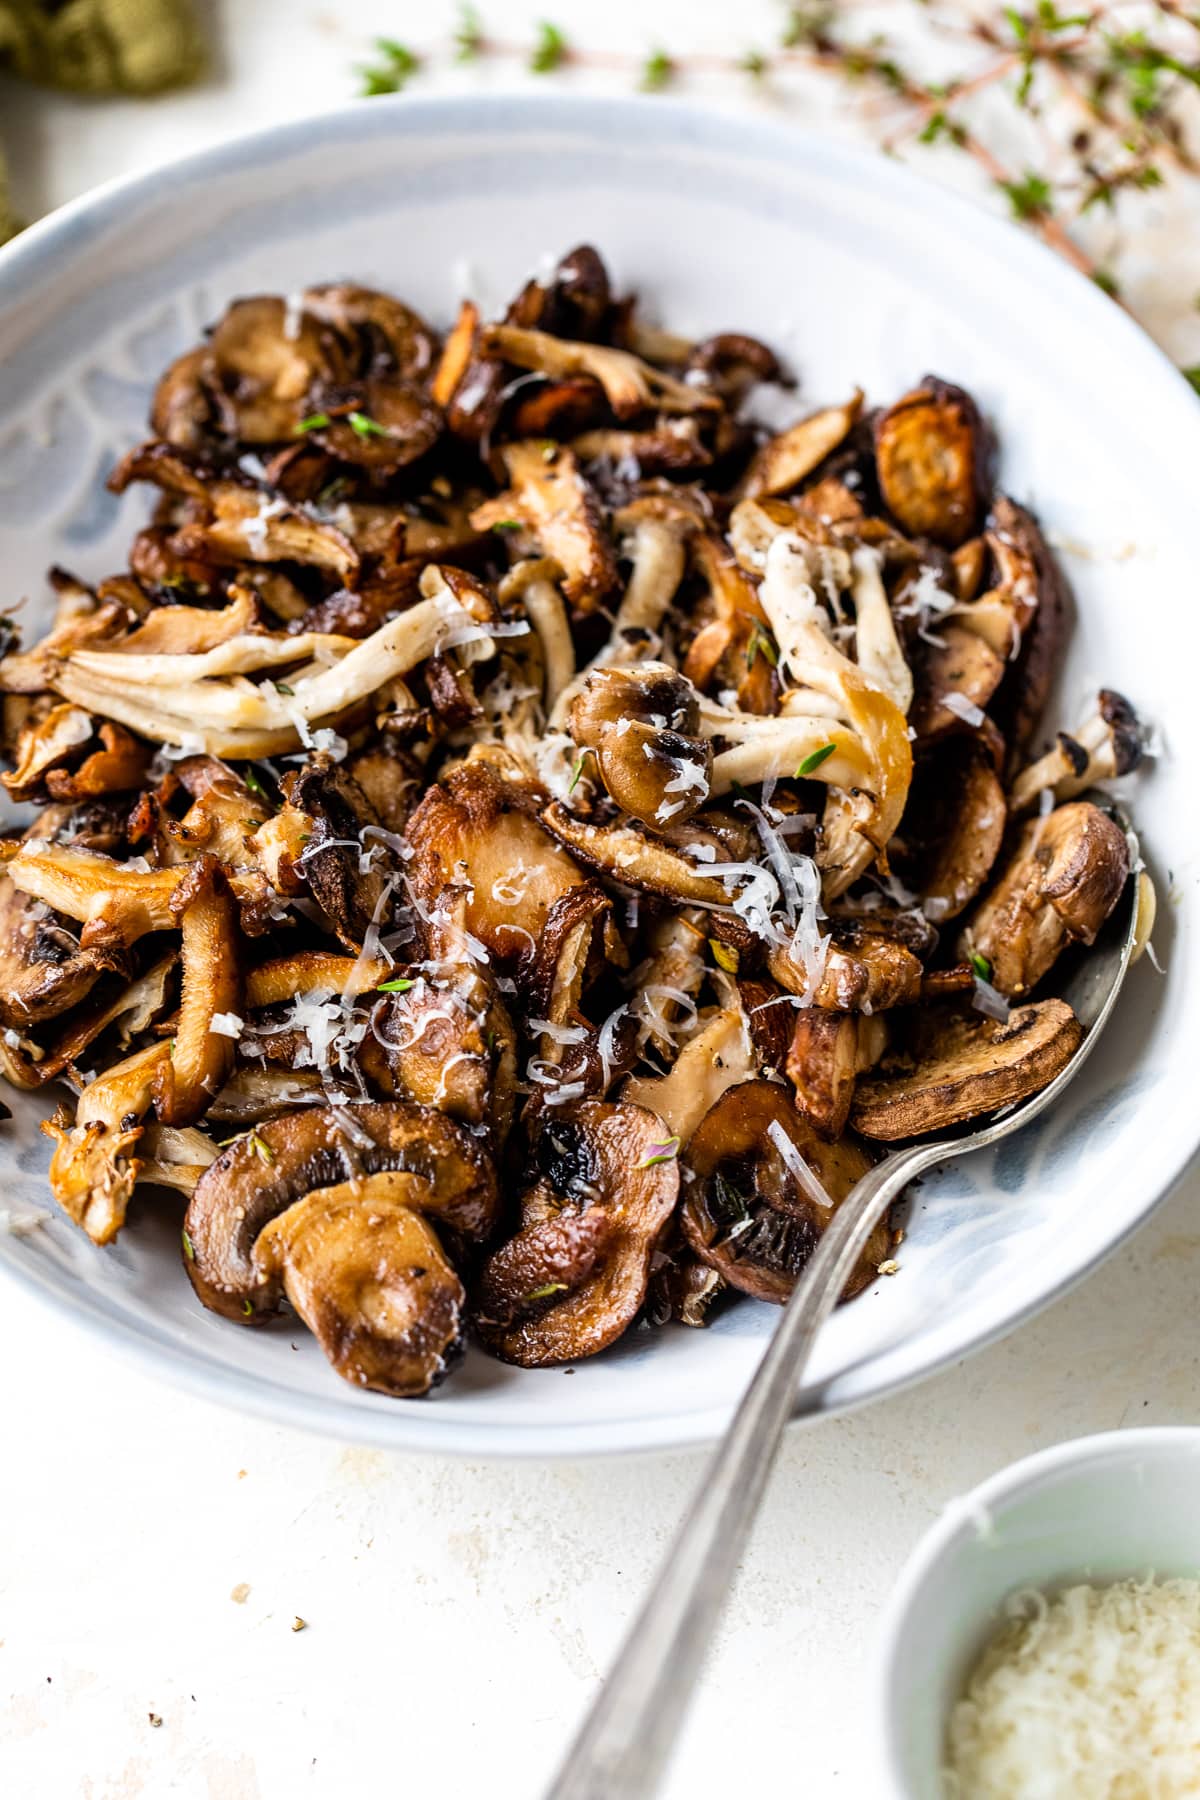 Roasted Mushrooms with Parmesan and Balsamic